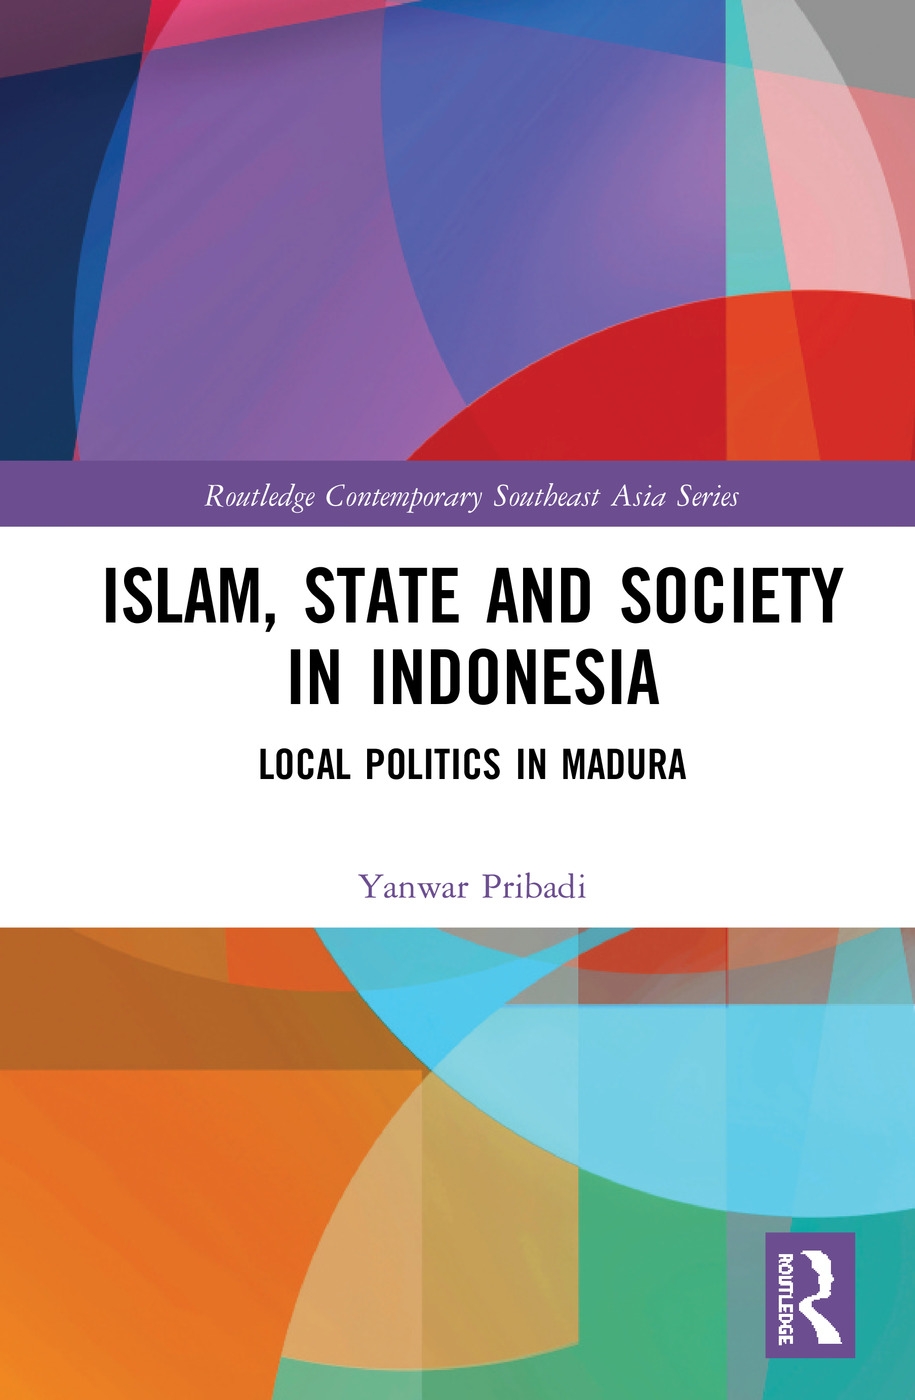 Islam, State and Society in Indonesia: Local Politics in Madura